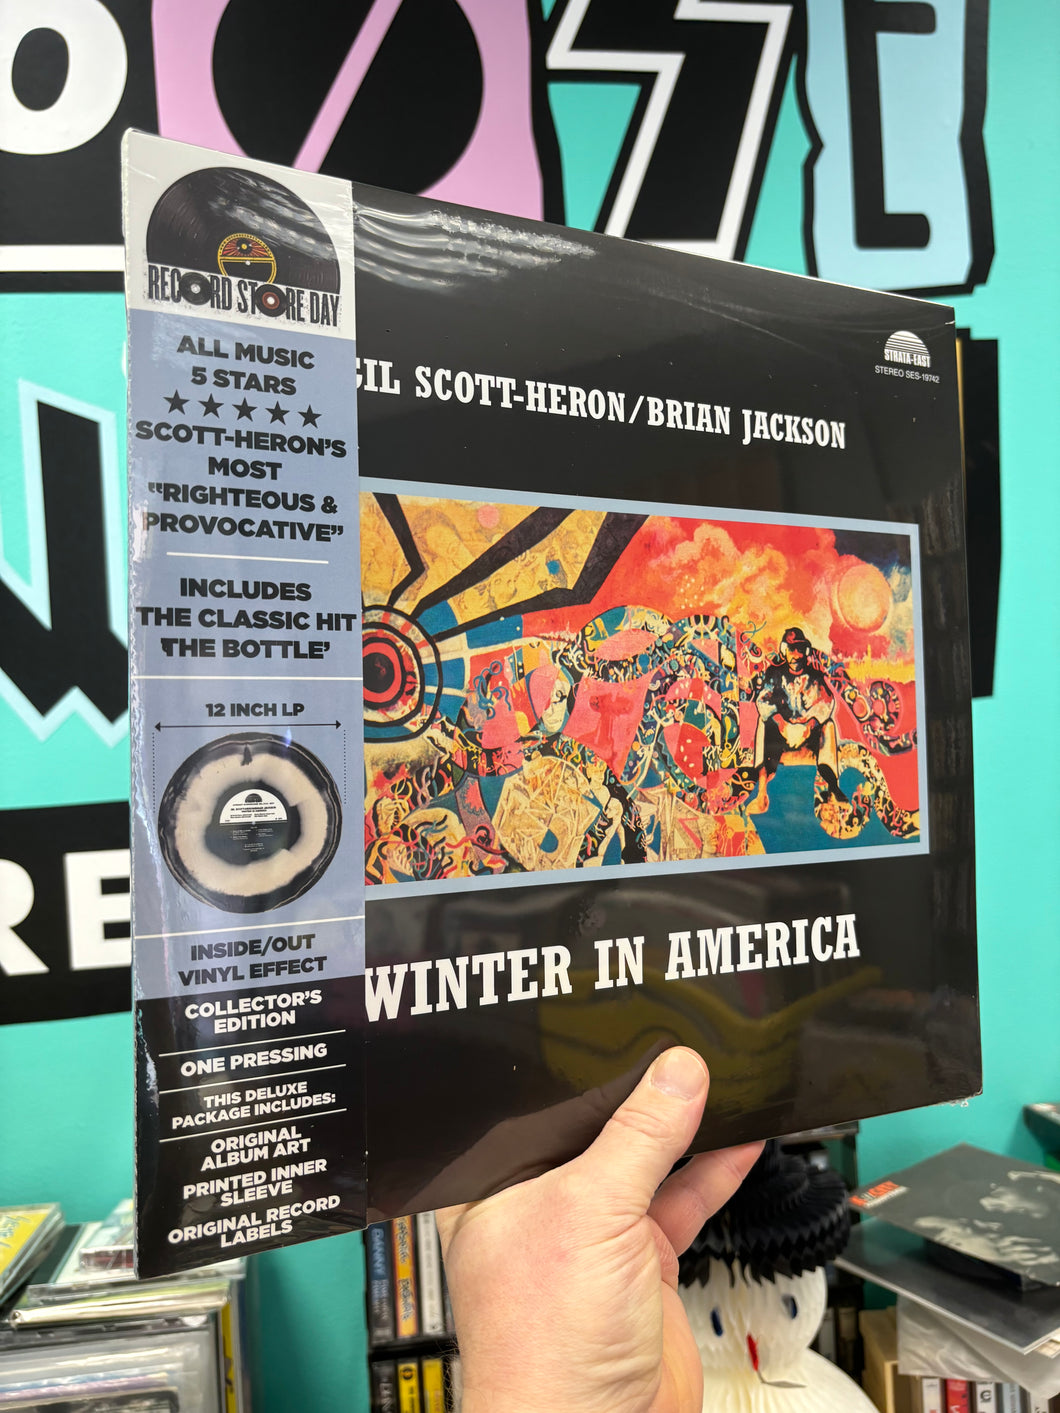 RSD 2024‼️‼️‼️ Gil Scott-Heron/Brian Jackson: Winter In America, Color vinyl with an inside/out black/white effect LP, reissue, Record Store Day, Limited Edition, Gatefold, Worldwide 2024